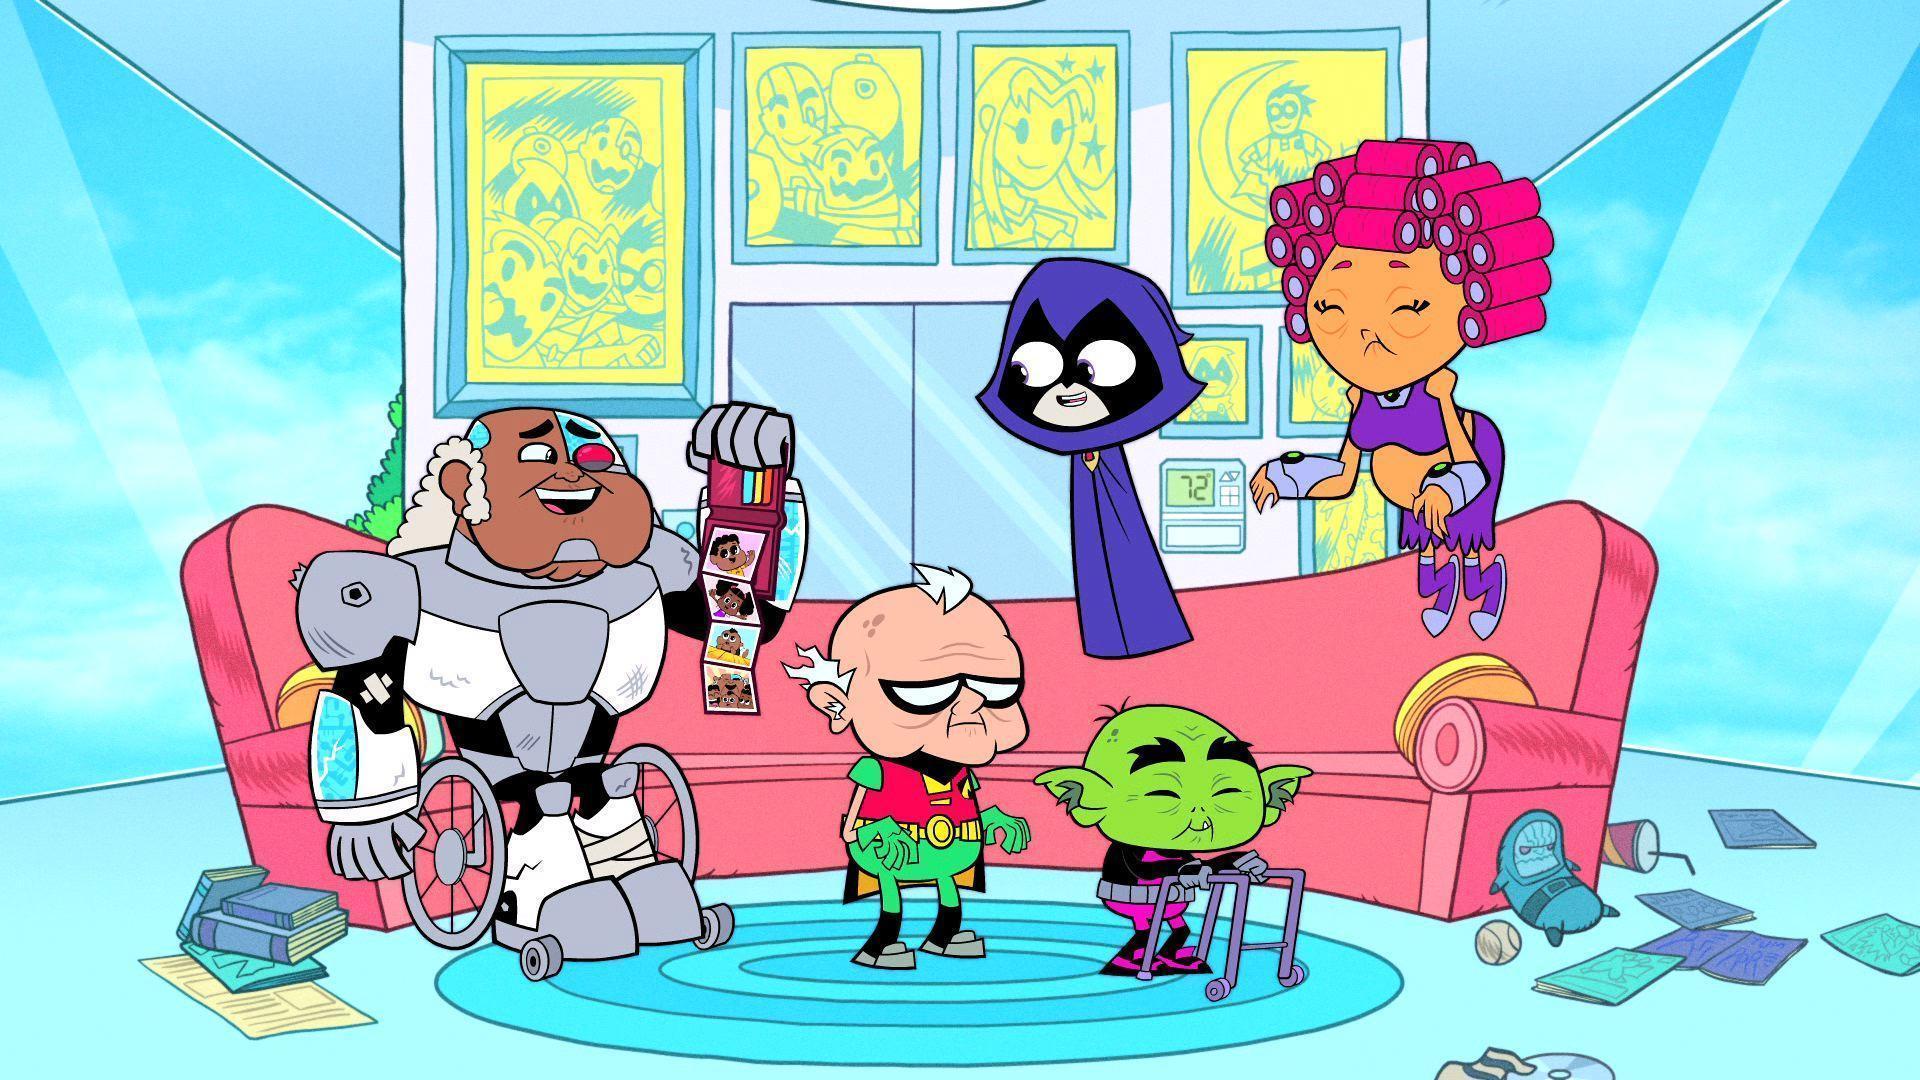 Teen Titans Go! - "Salty Codgers" Clip and Image Titans